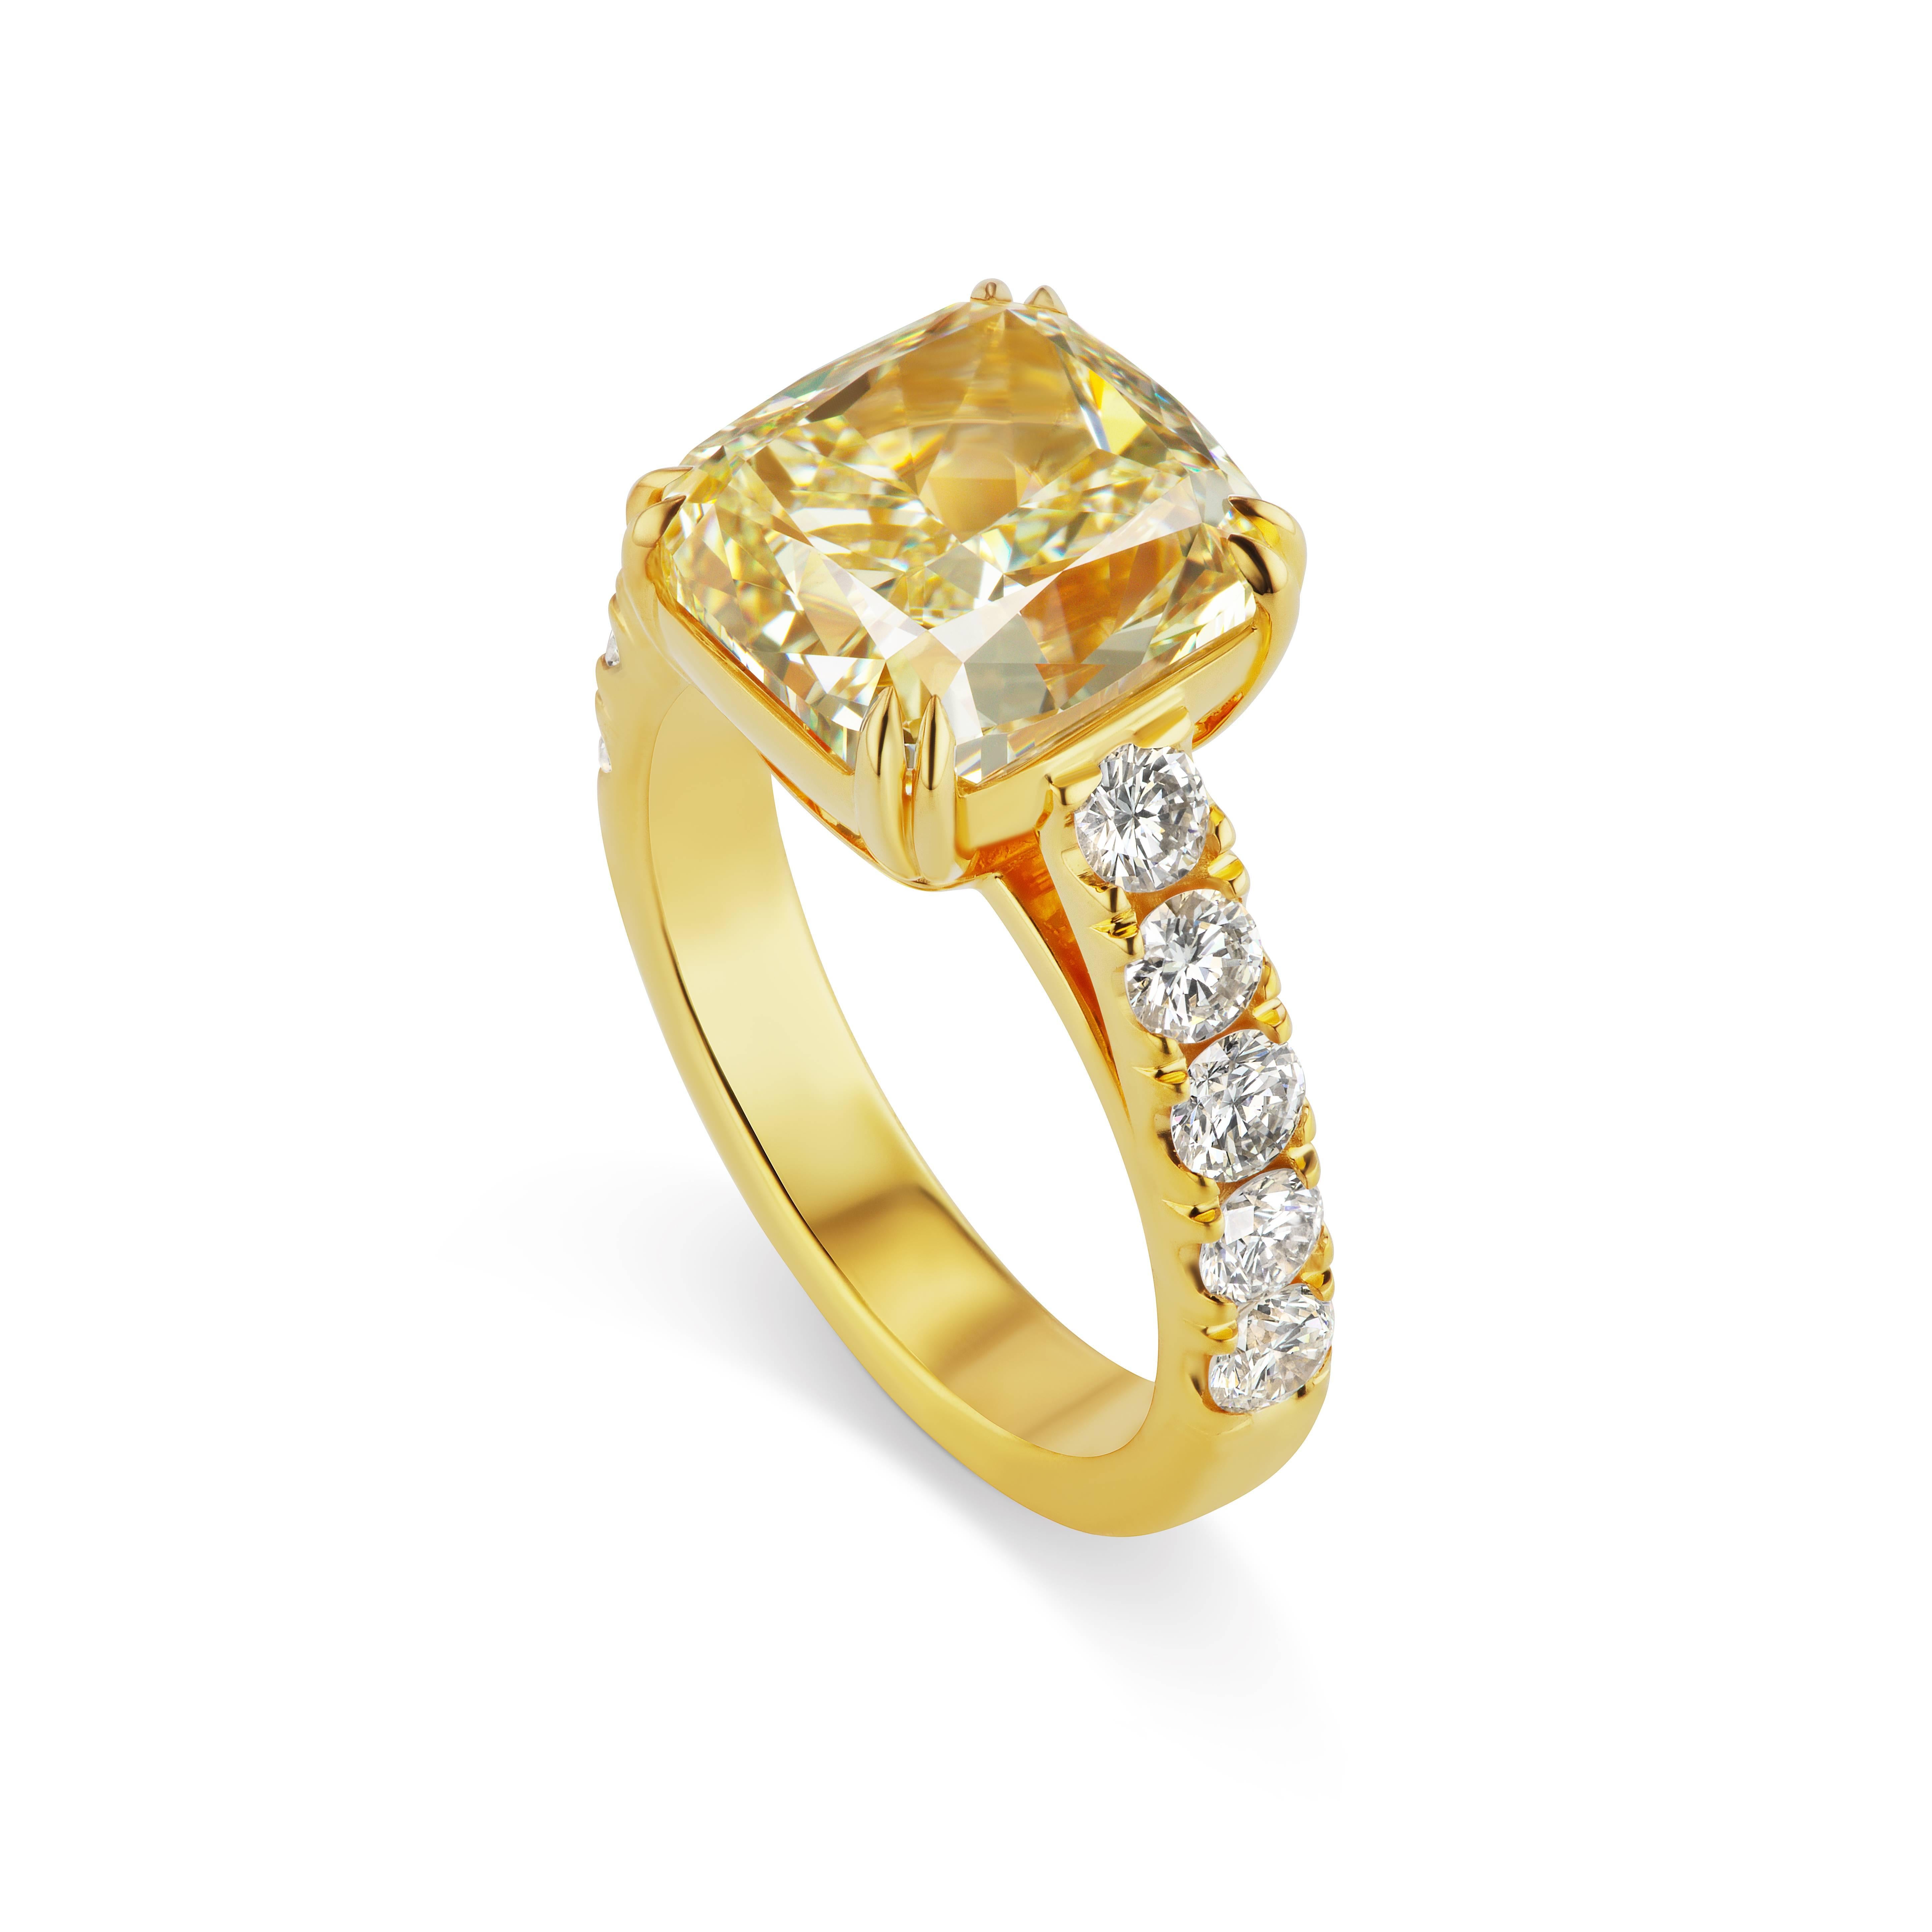 This Scarselli 6.06 carat  Fancy Light Yellow Radiant cut diamond is VS2 clarity and is beautifully set with 5 white diamonds on each side in 18 karat Yellow Gold.    For any other Scarselli 1st Dibs inventory of spectacular fancy color diamonds and